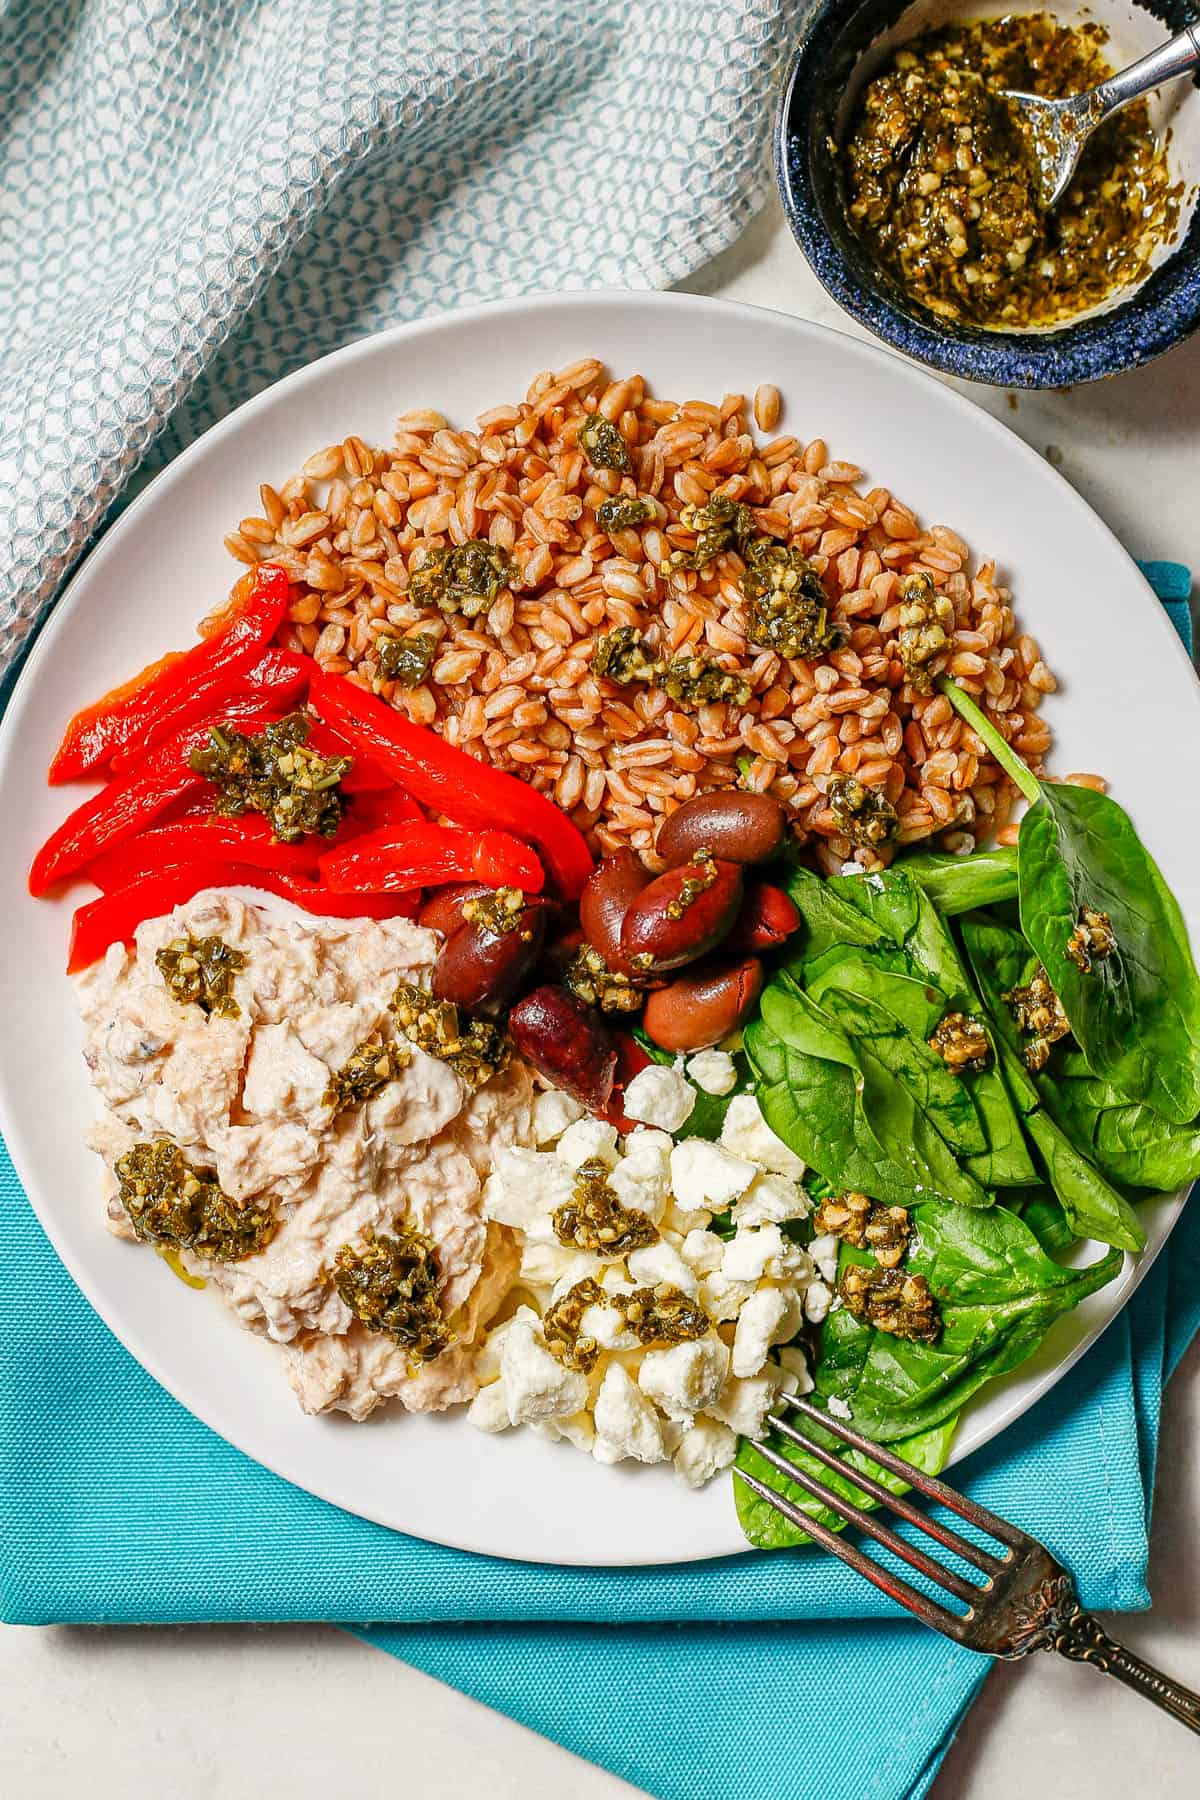 An arranged salmon grain bowl with veggies, feta and olives and a drizzle of pesto over everything.